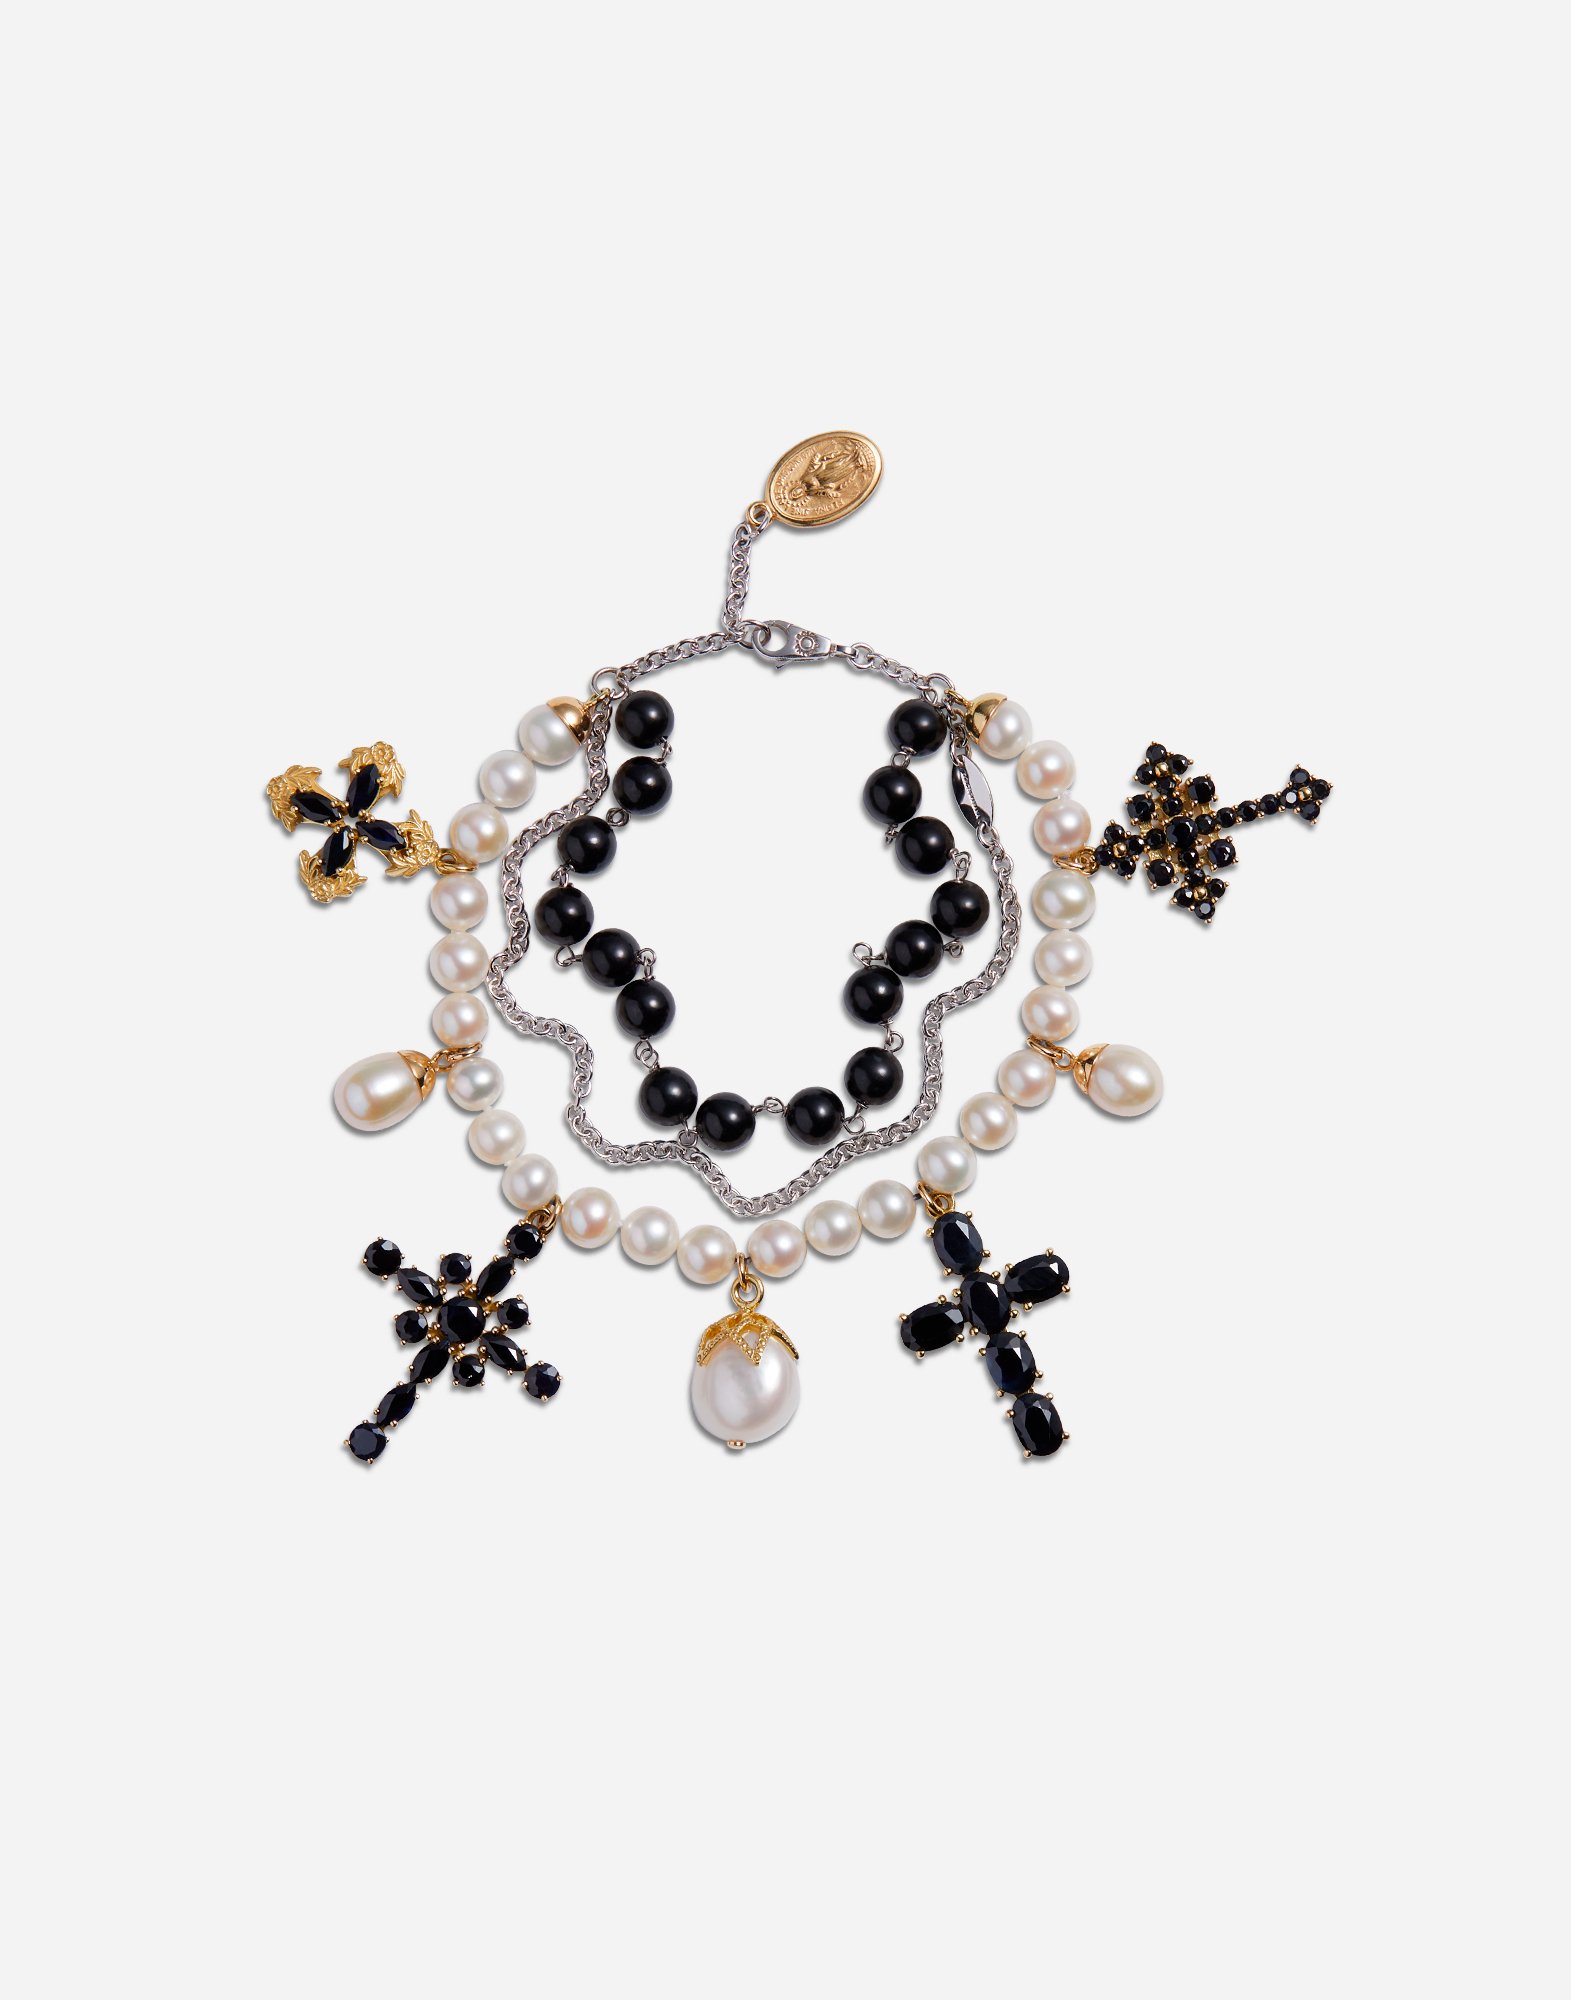 Dolce & Gabbana Yellow And White Gold Family Bracelet With Cblack Sapphire, Pearl And Black Jade Beads